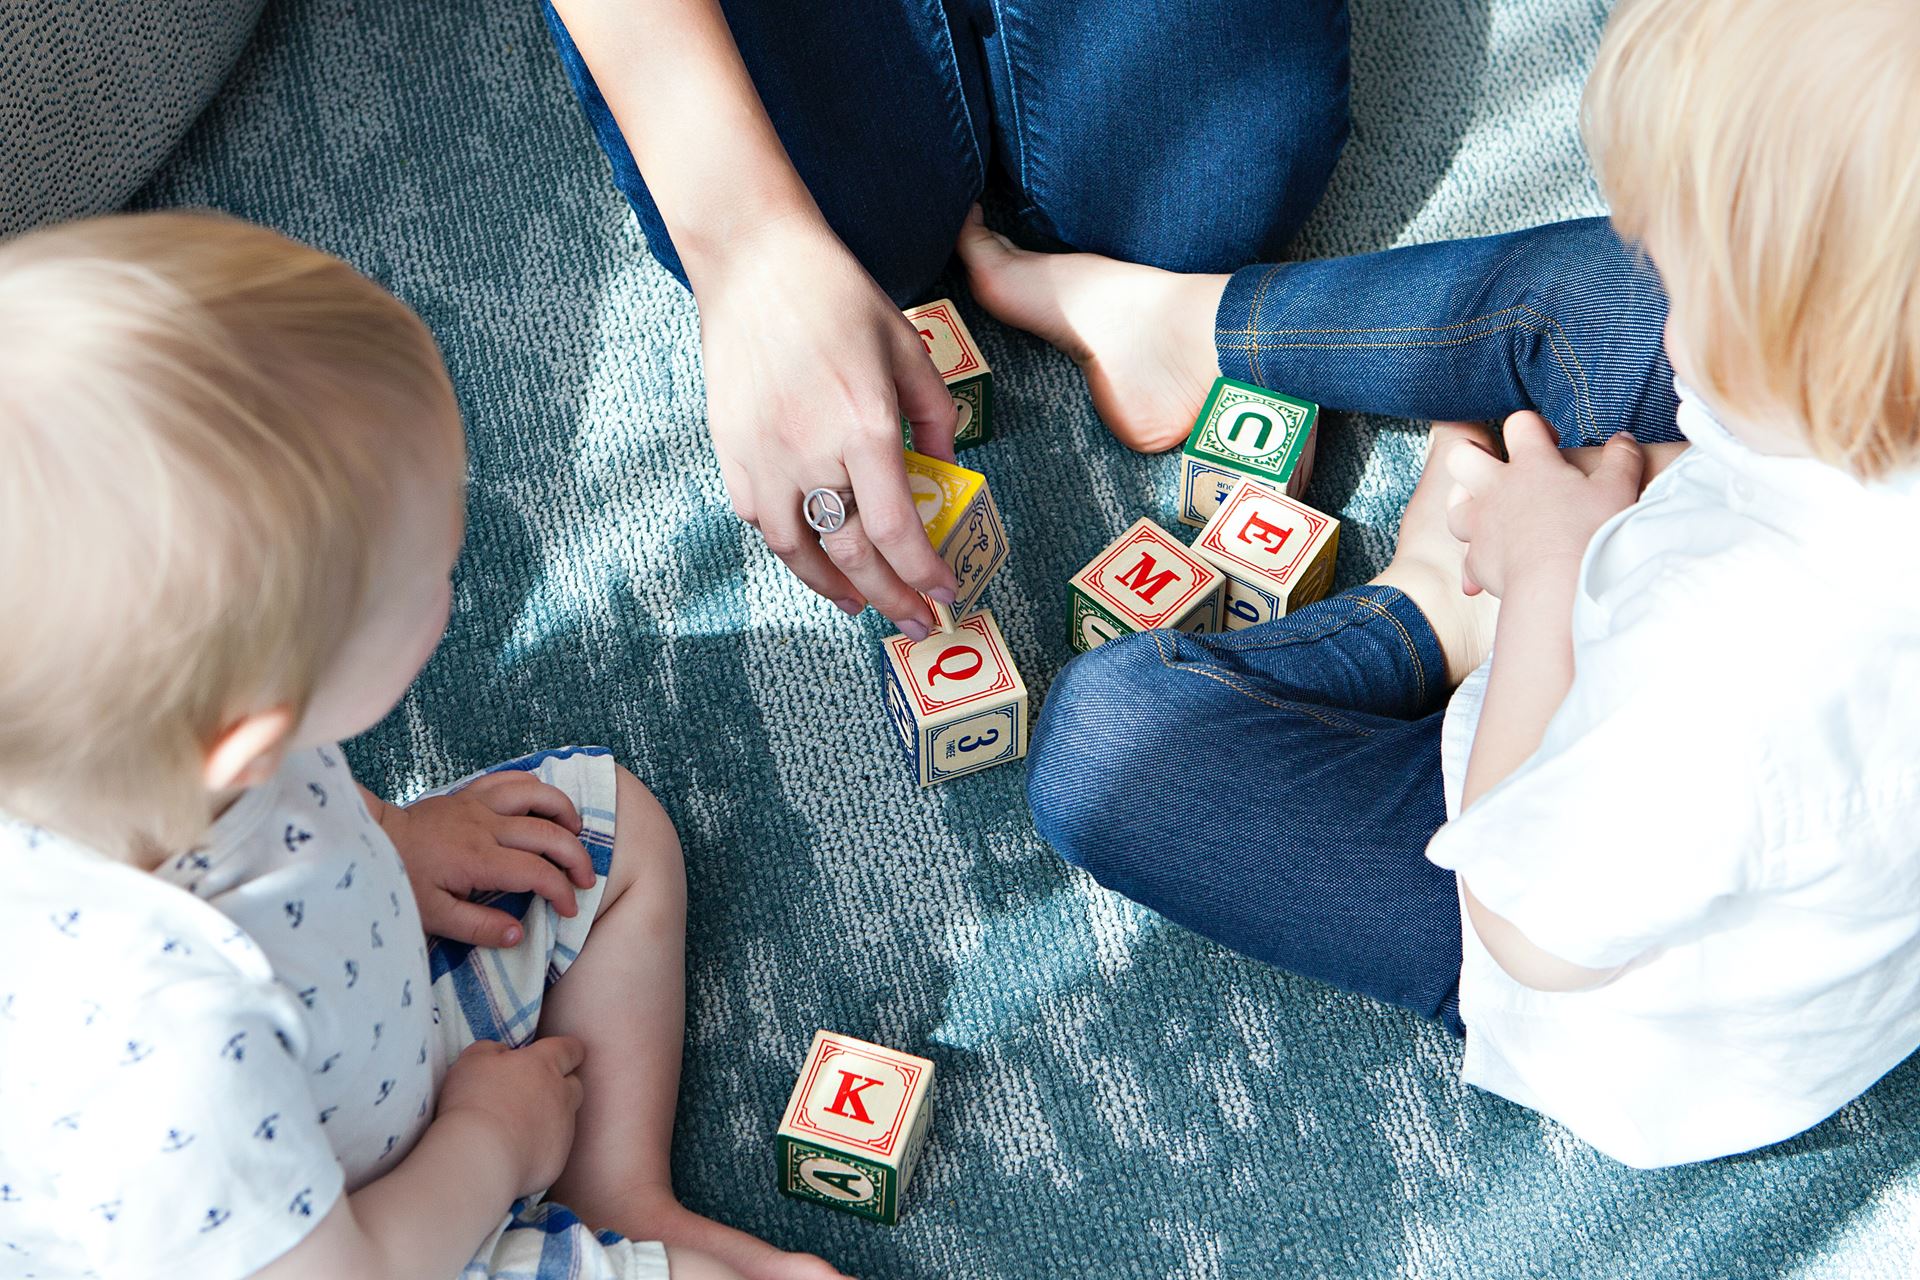 Children sitting and playing with blocks